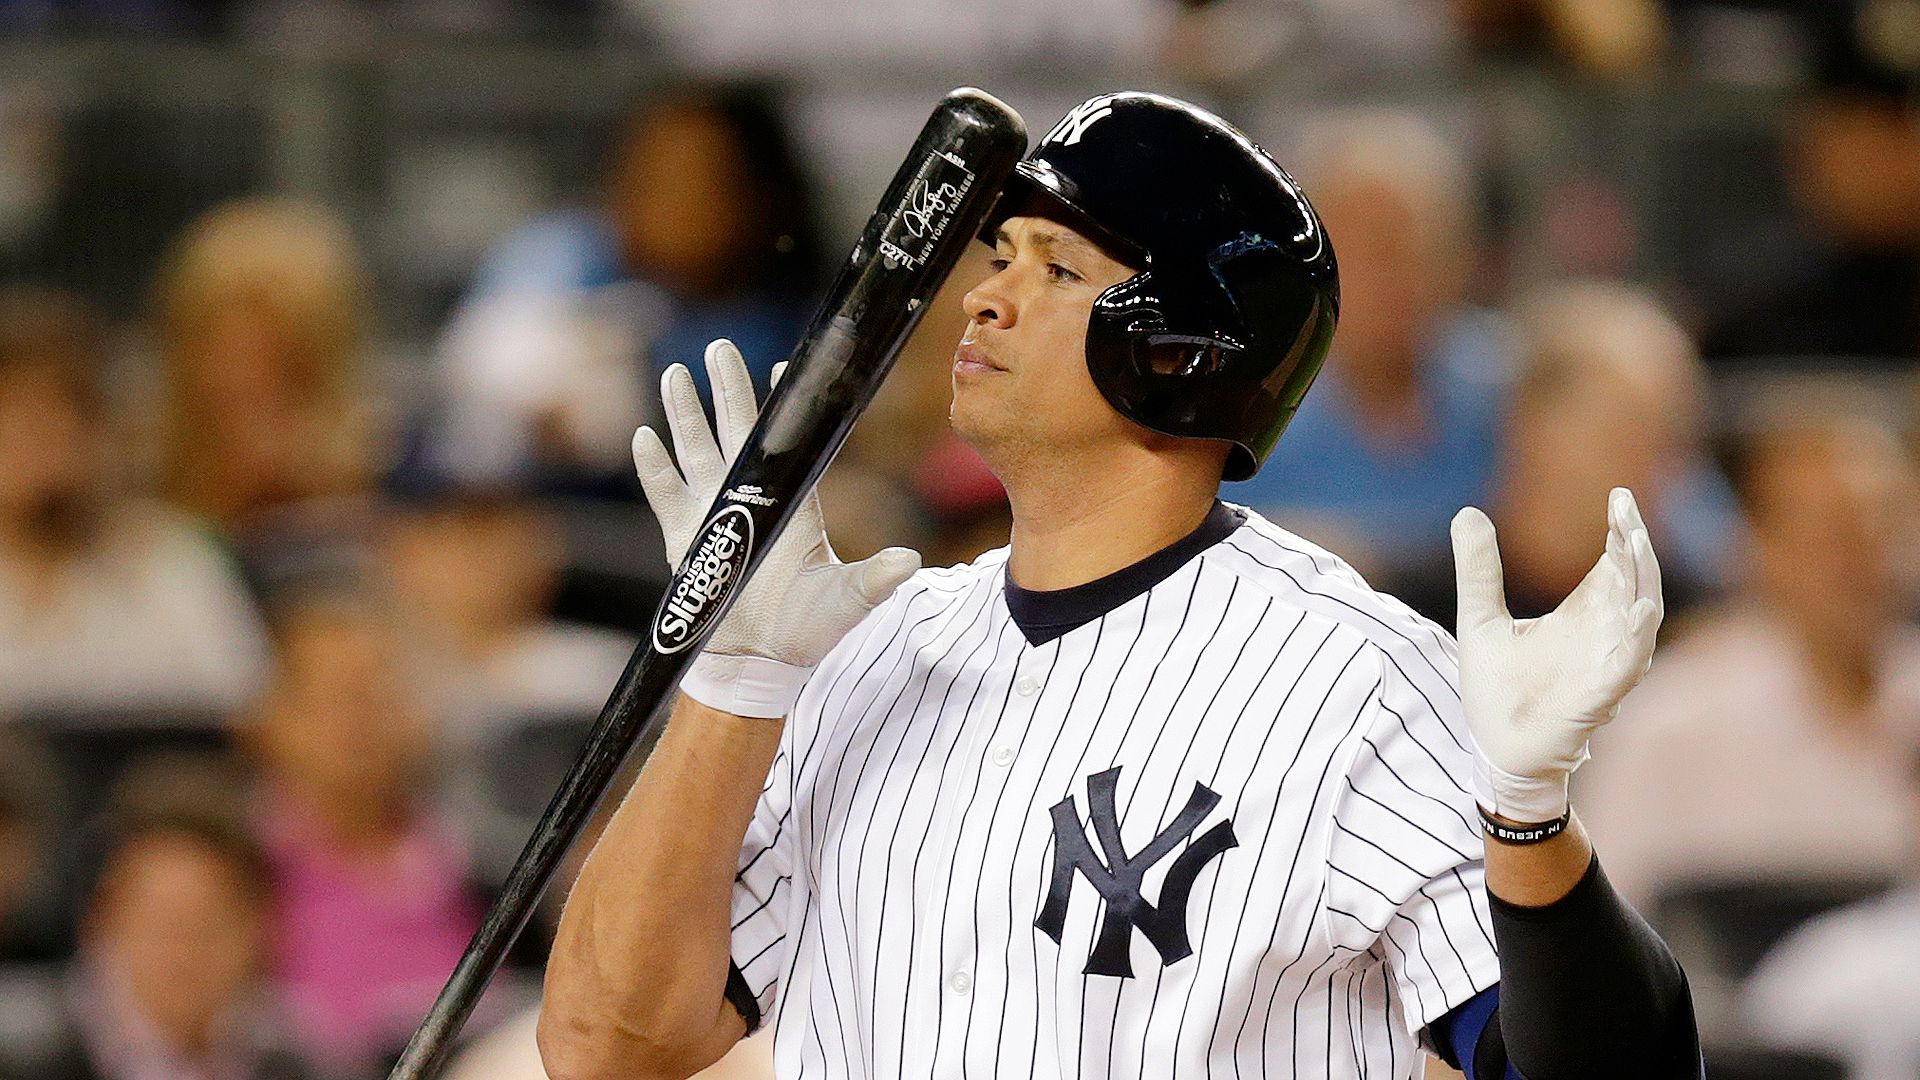 MLB tells Yankees that Alex Rodriguez will be suspended - Los